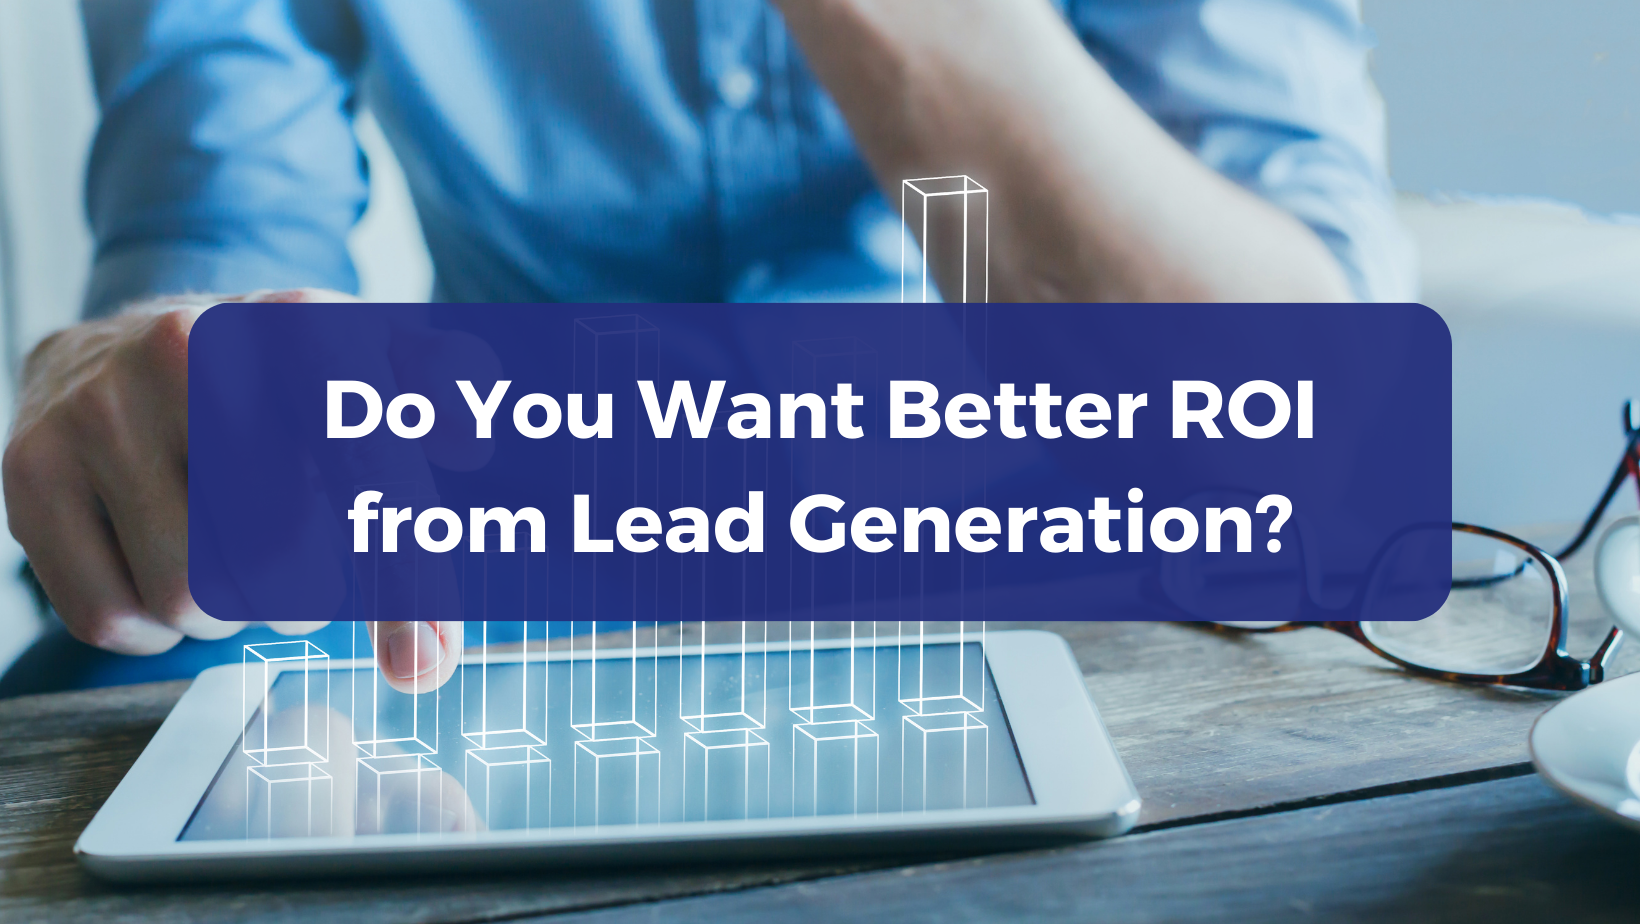 Do You Want Better ROI from Lead Generation? Follow these 3 steps…